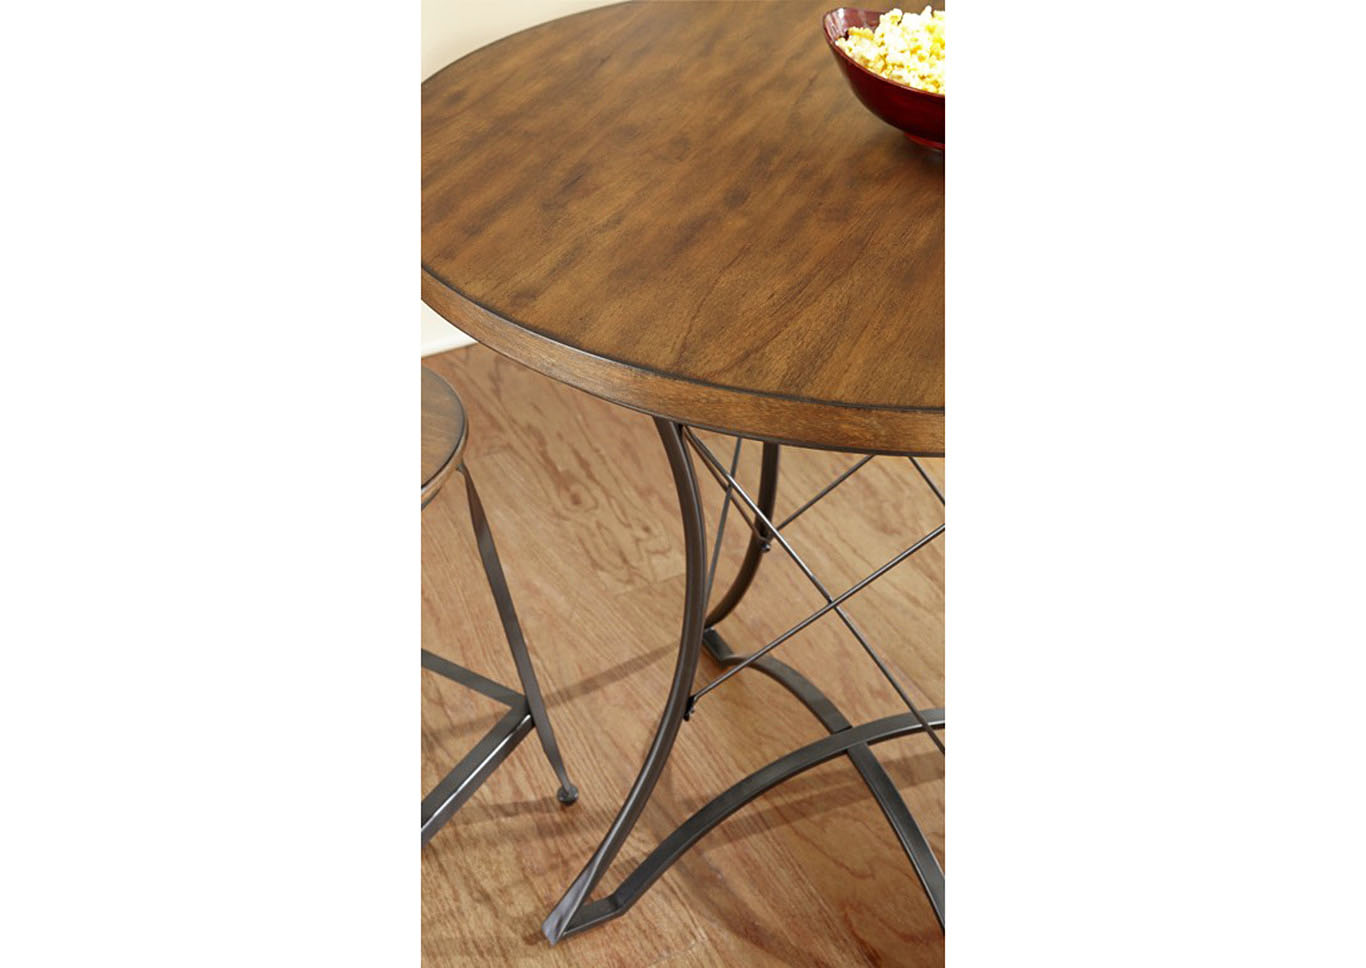 Adele Birch Round Counter Dining Table,Steve Silver